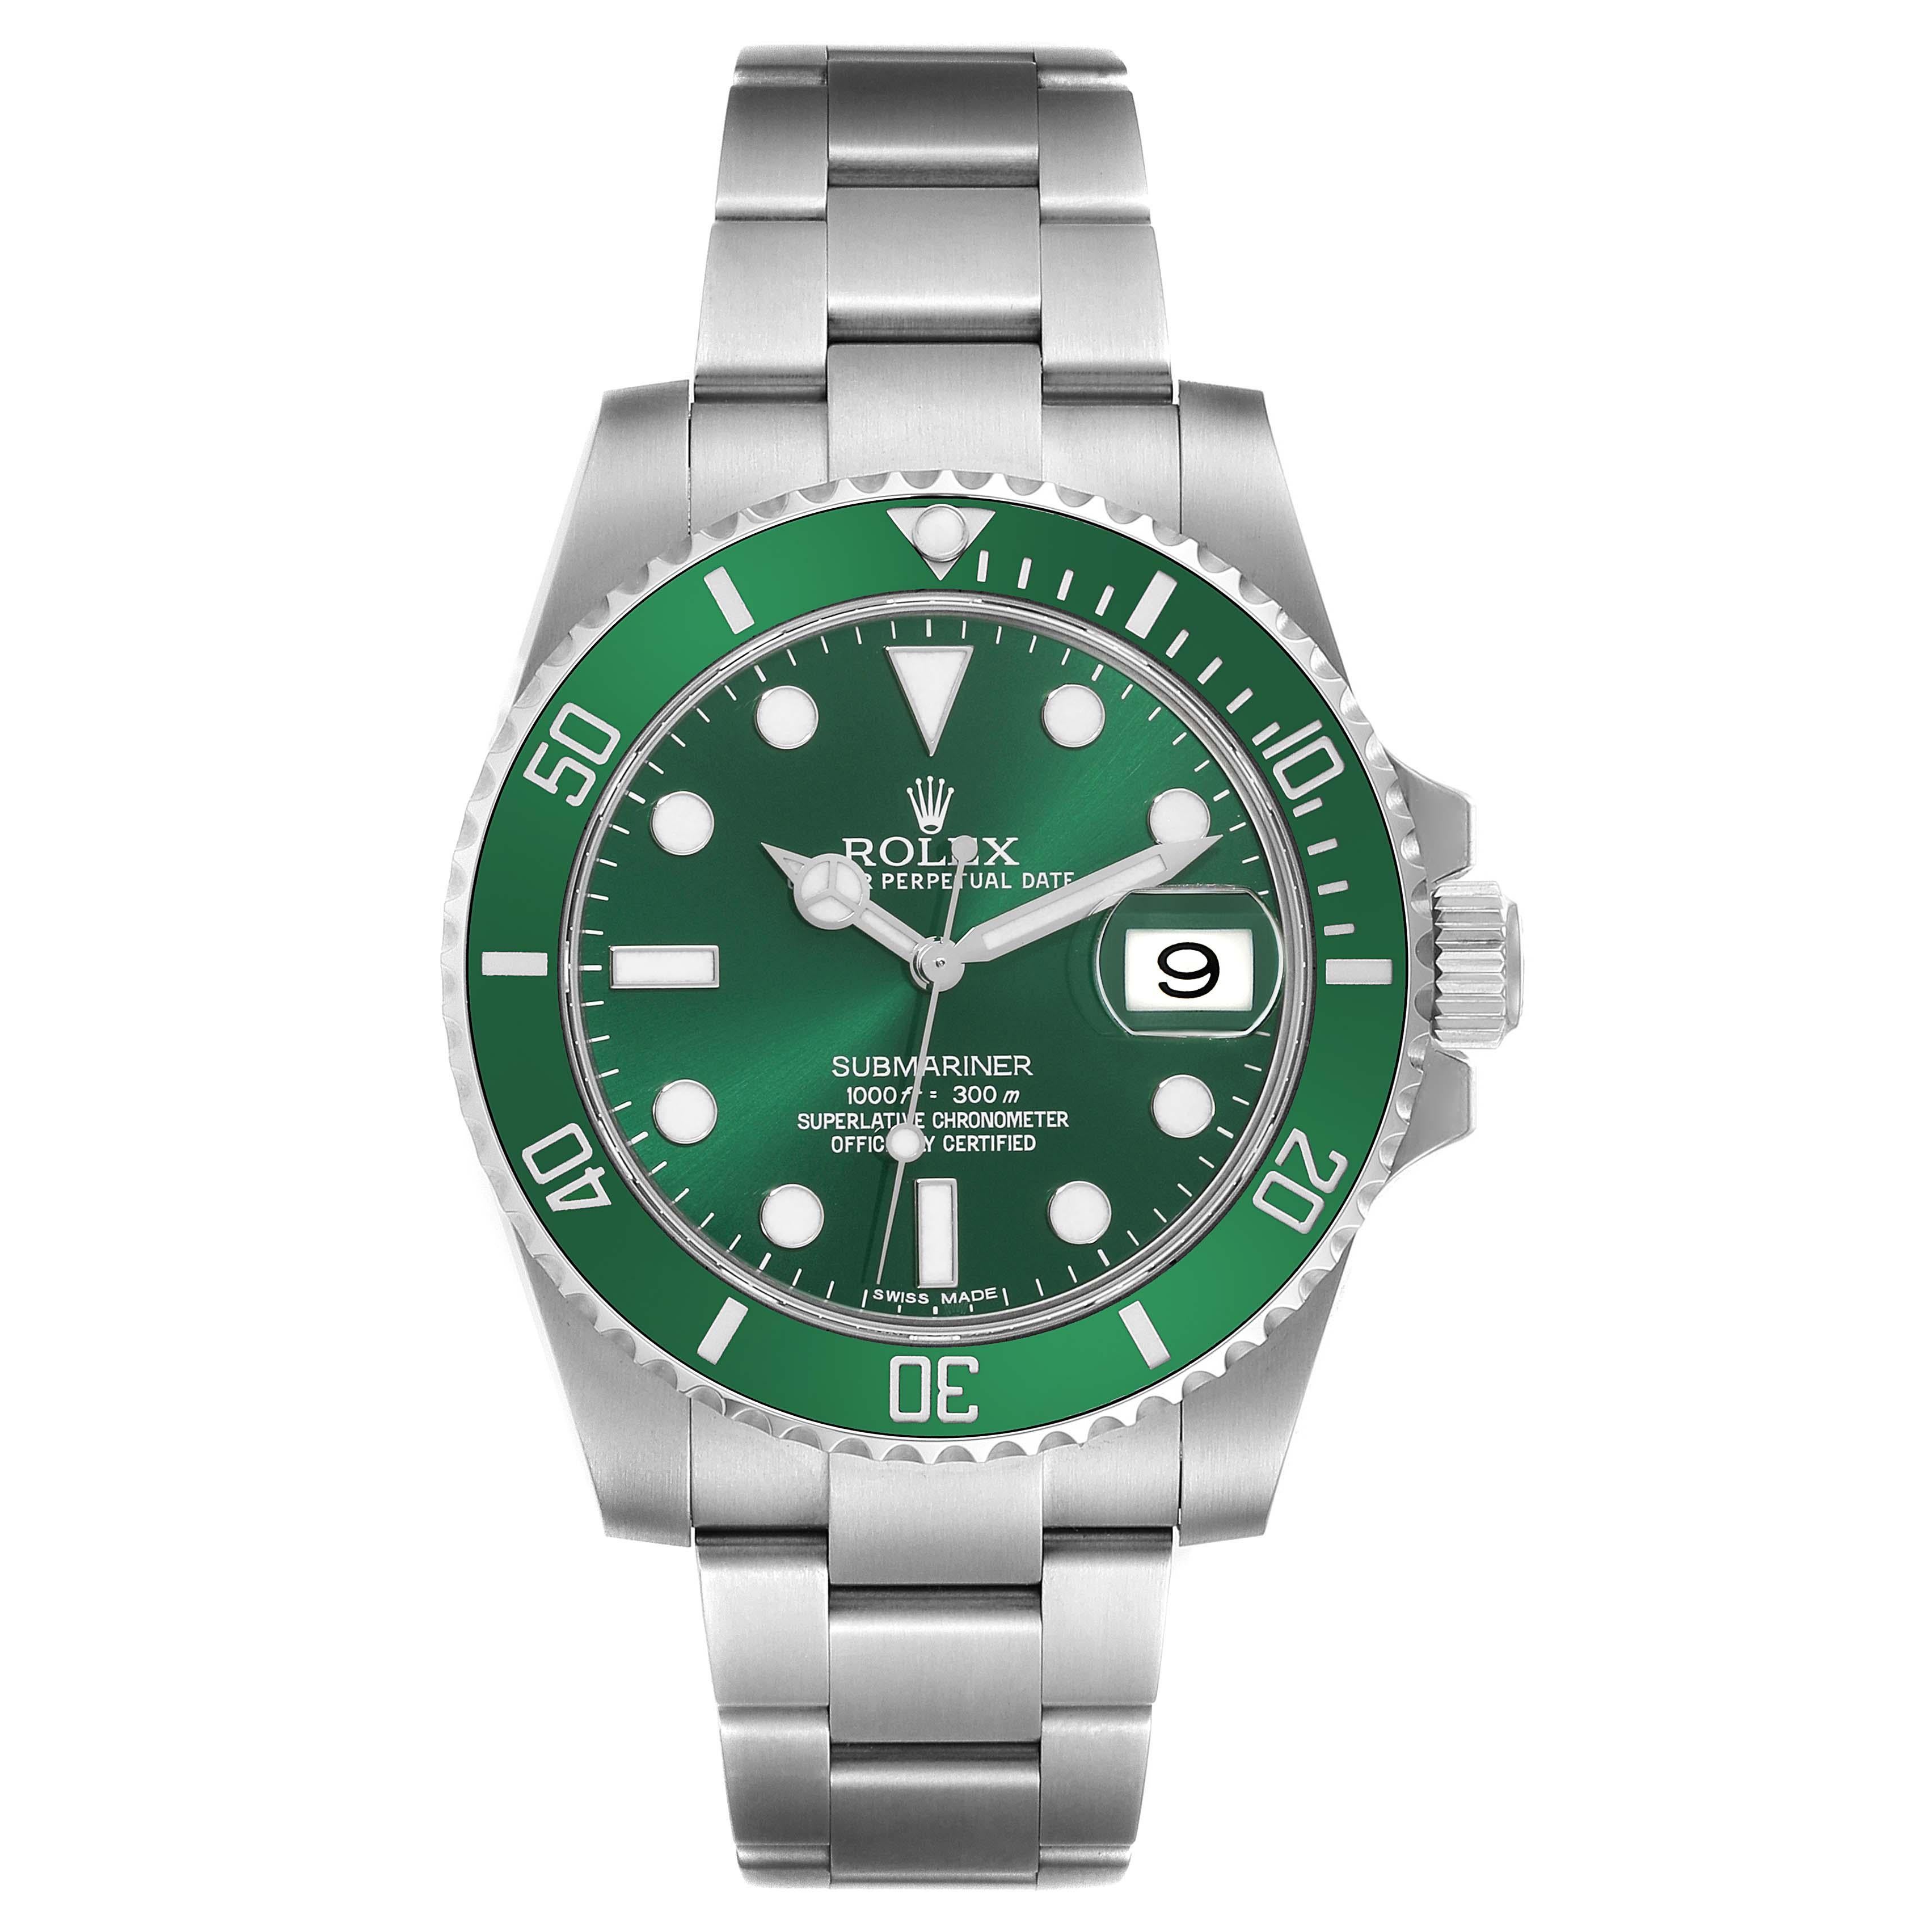 Rolex Submariner Hulk Green Dial Steel Mens Watch 116610LV. Officially certified chronometer automatic self-winding movement. Oyster case 40 mm in diameter. Rolex logo on the crown. Special time-lapse unidirectional rotating green ceramic bezel.